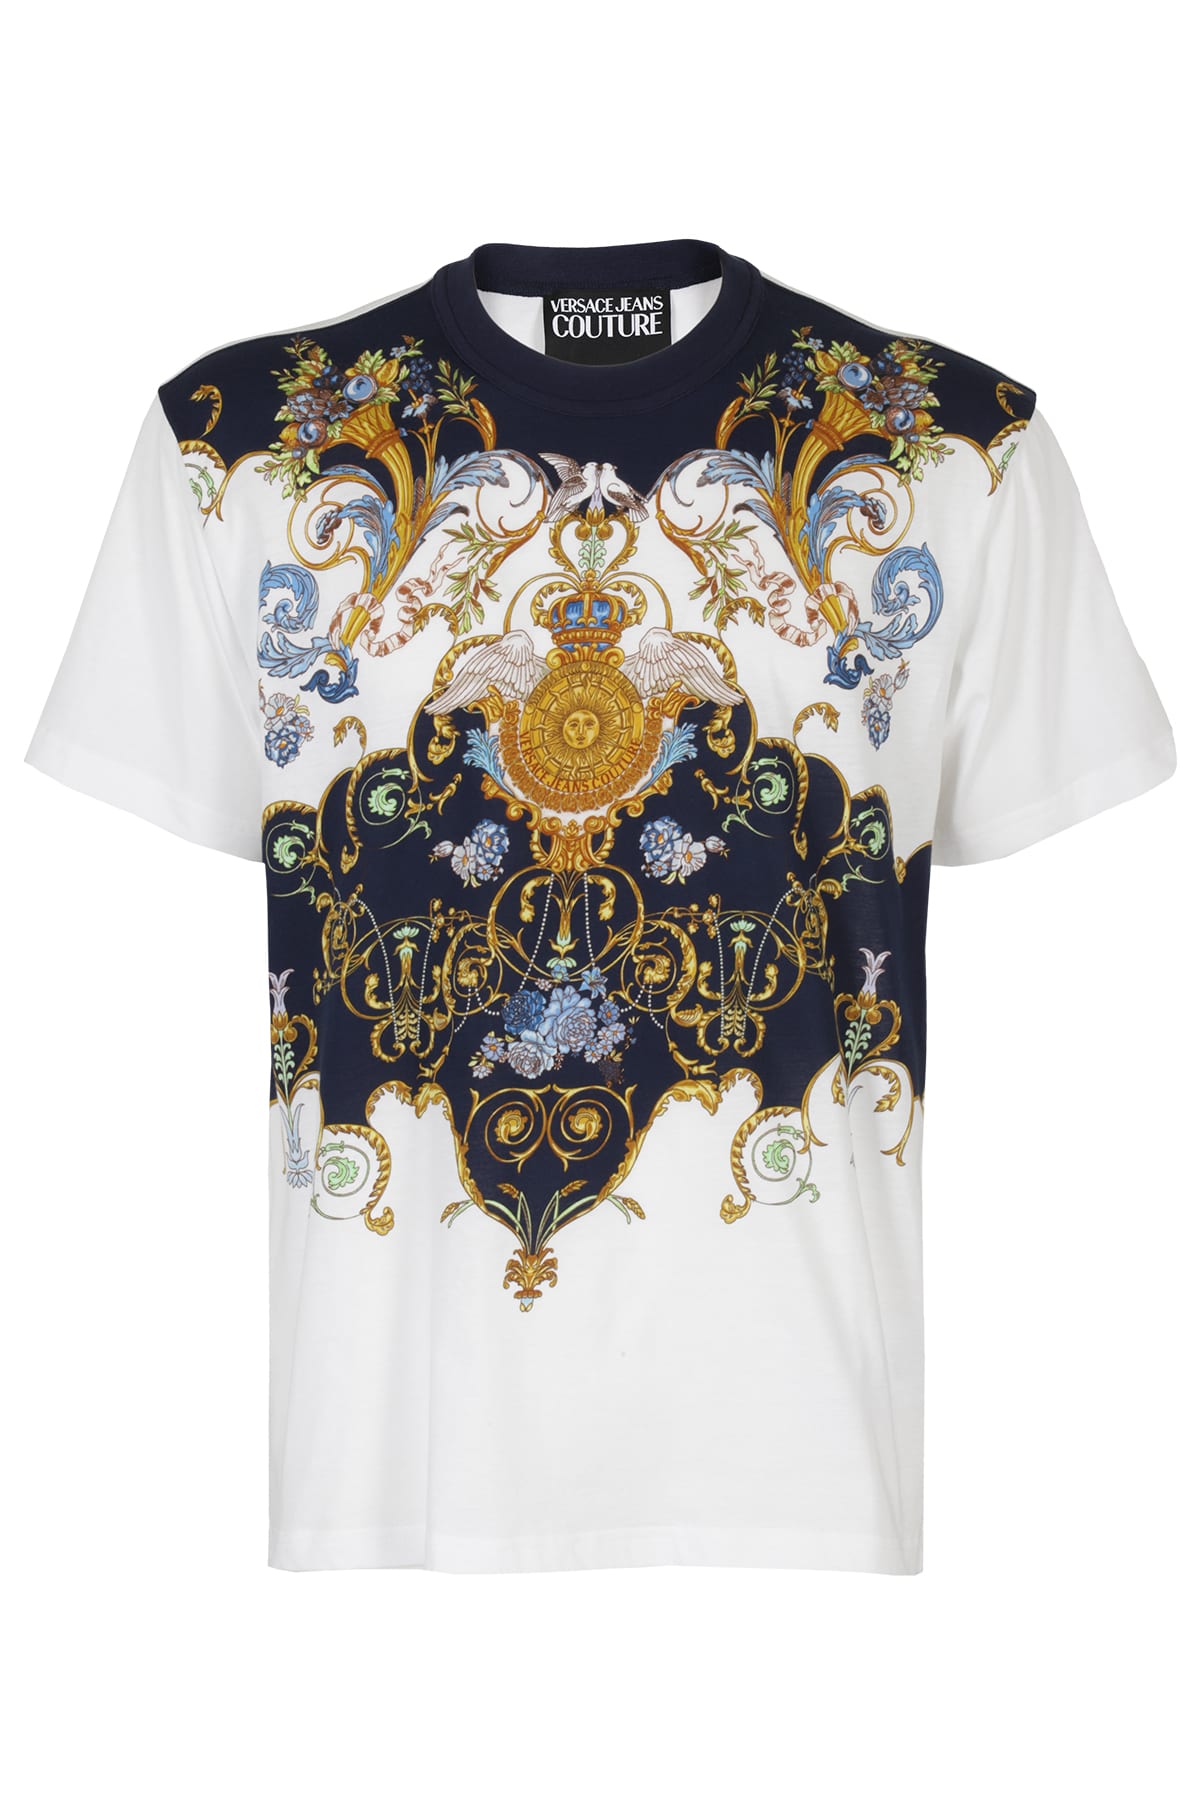 VERSACE JEANS COUTURE T-SHIRT,11895860